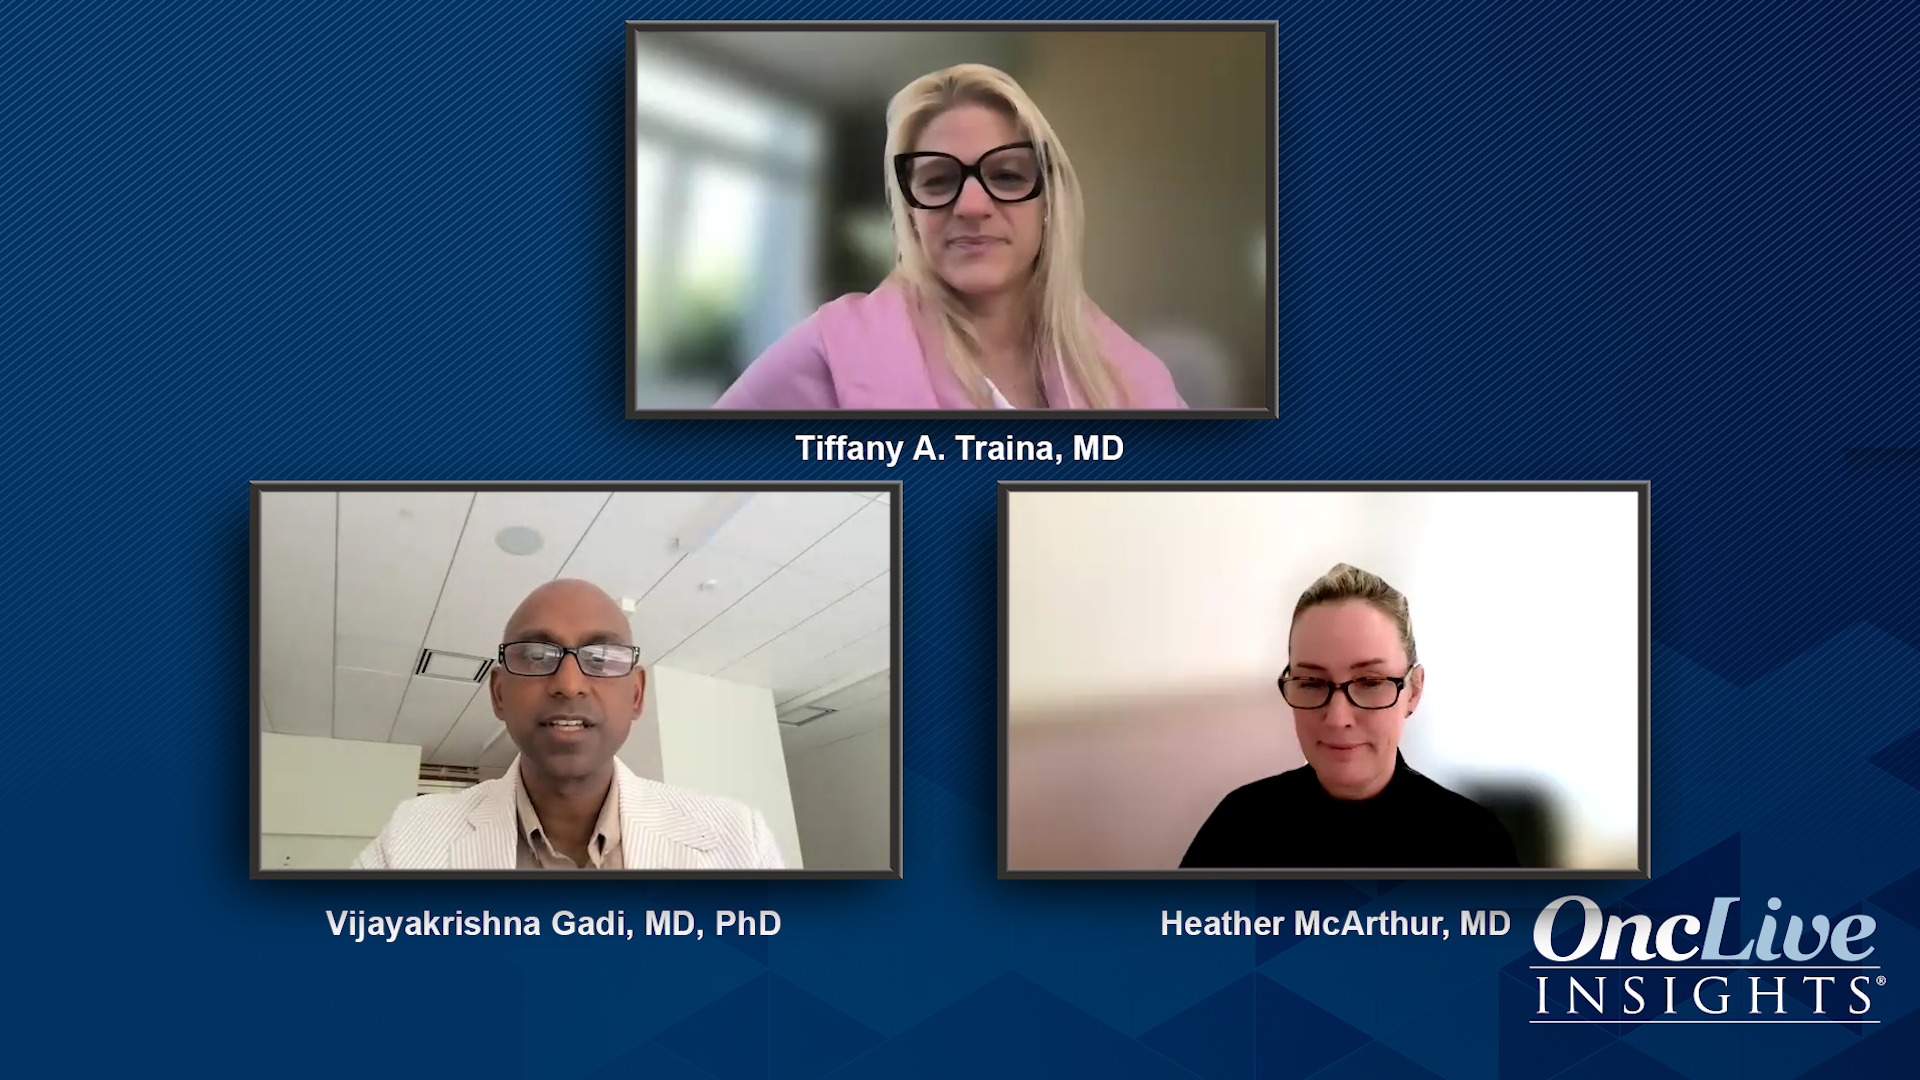 A panel of 3 experts on breast cancer